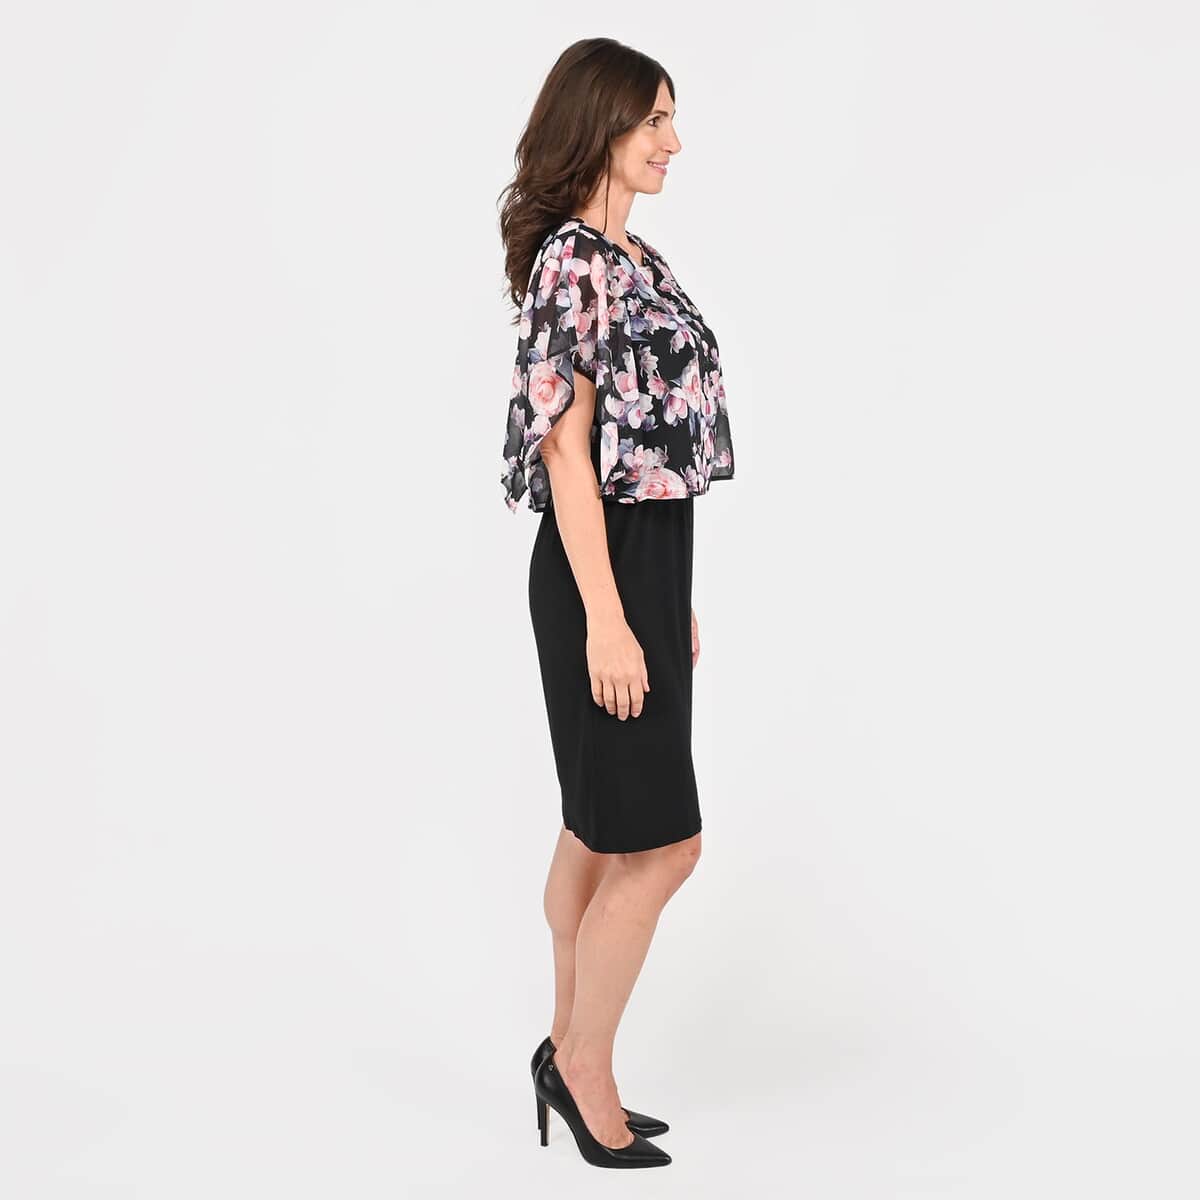 Tamsy Black Floral Dress with Overlay - L image number 2